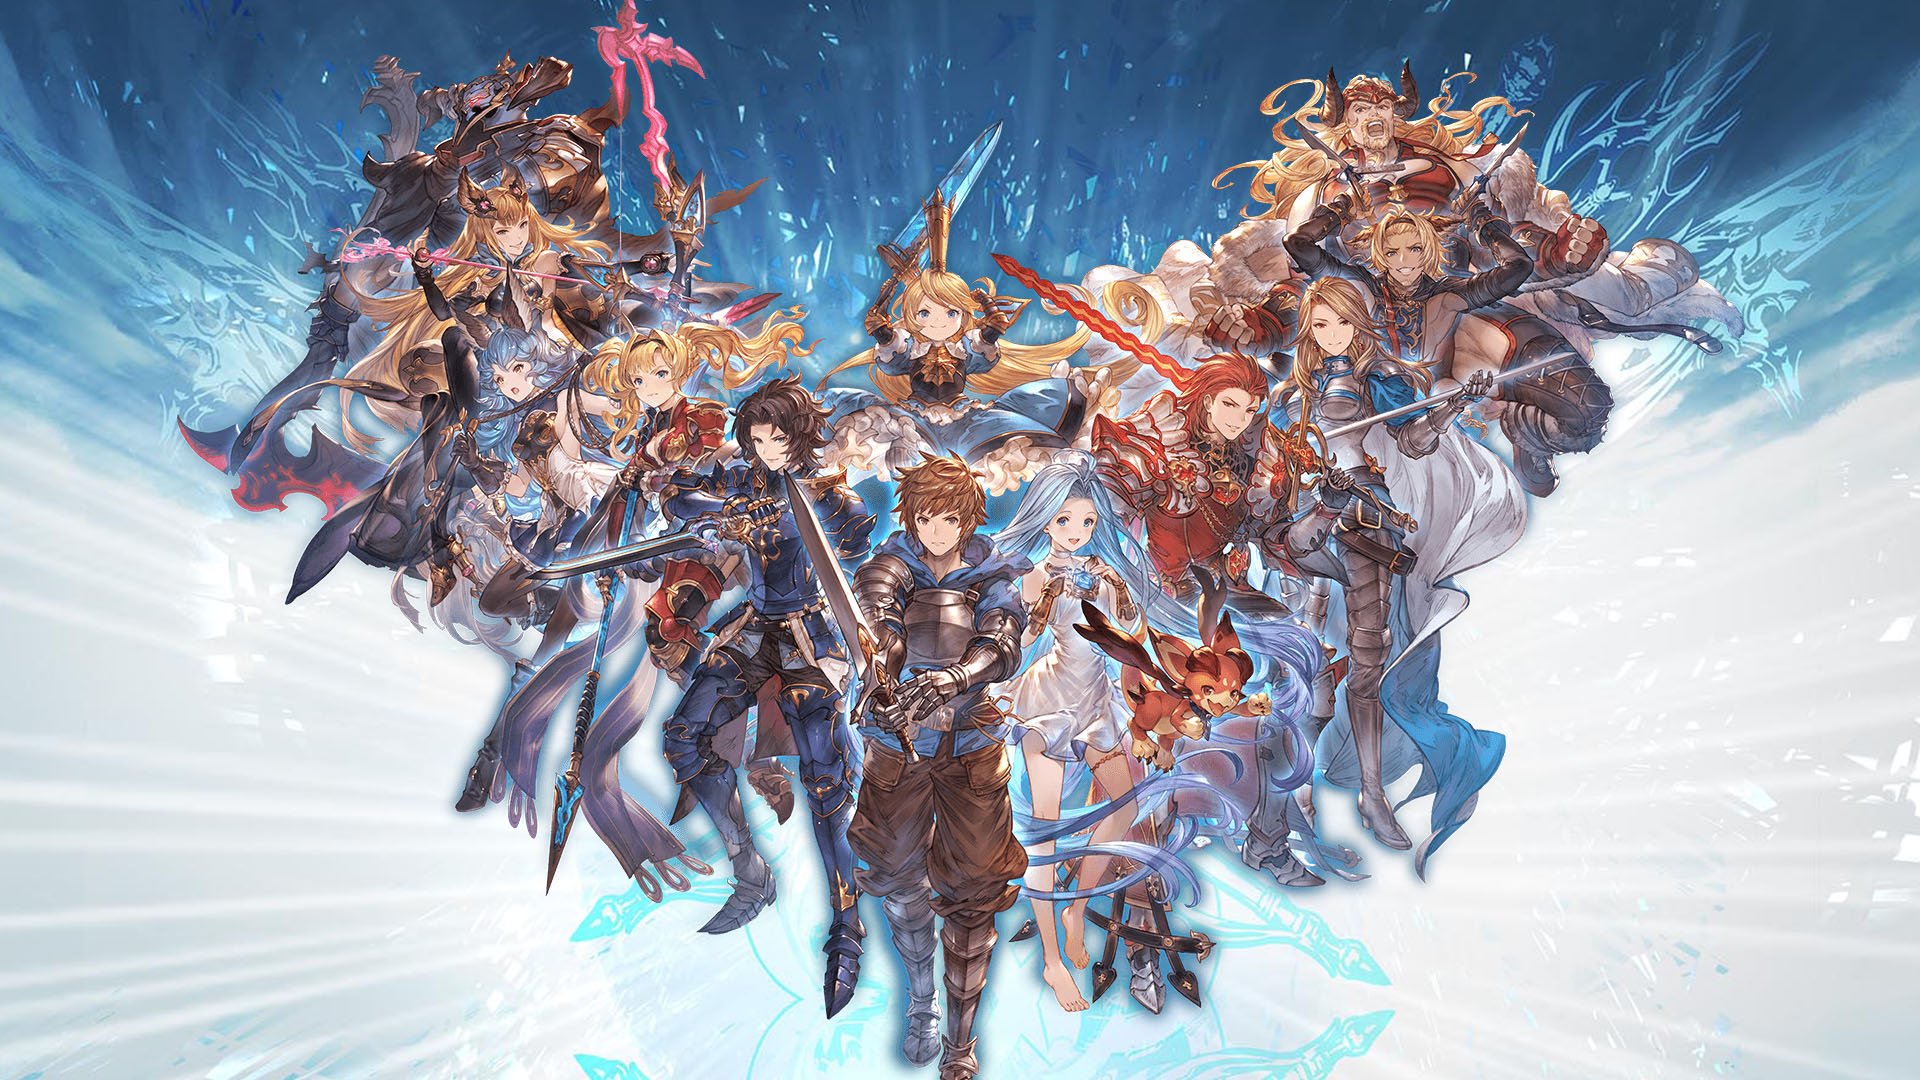 Granblue Fantasy USA on X: Cheer up, Gran. A new episode of